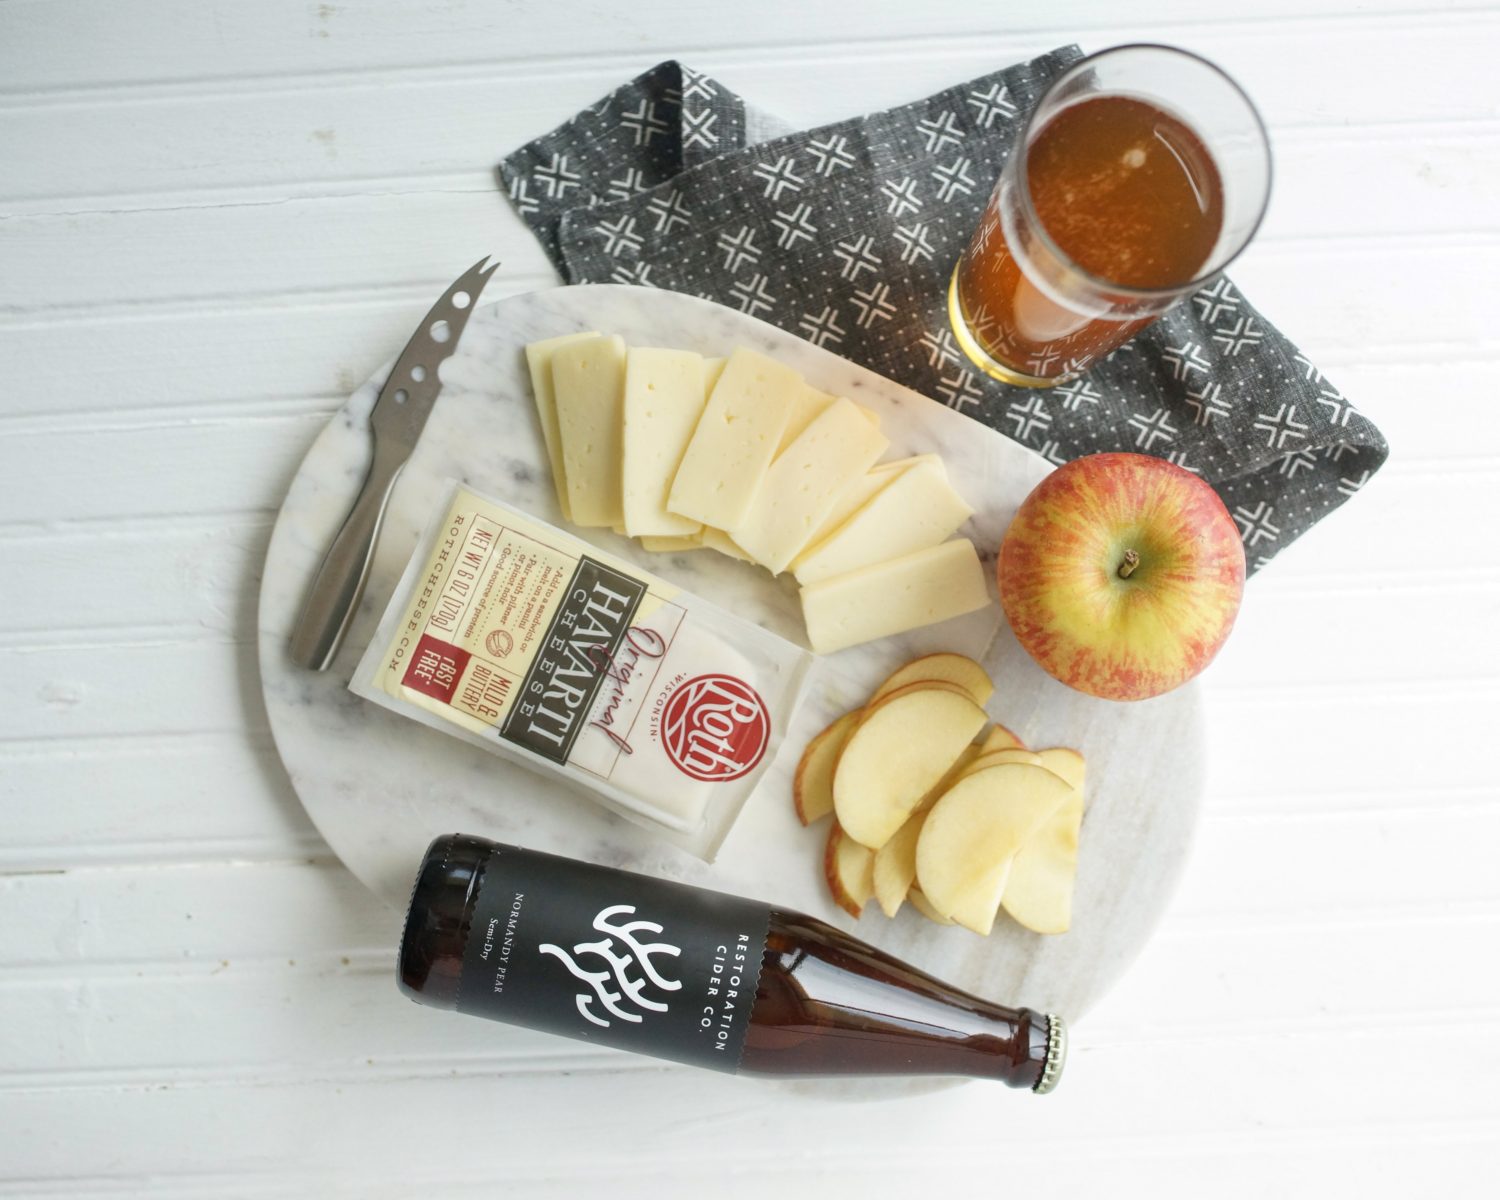 Easy Hard Cider & Cheese Pairings - Roth Cheese